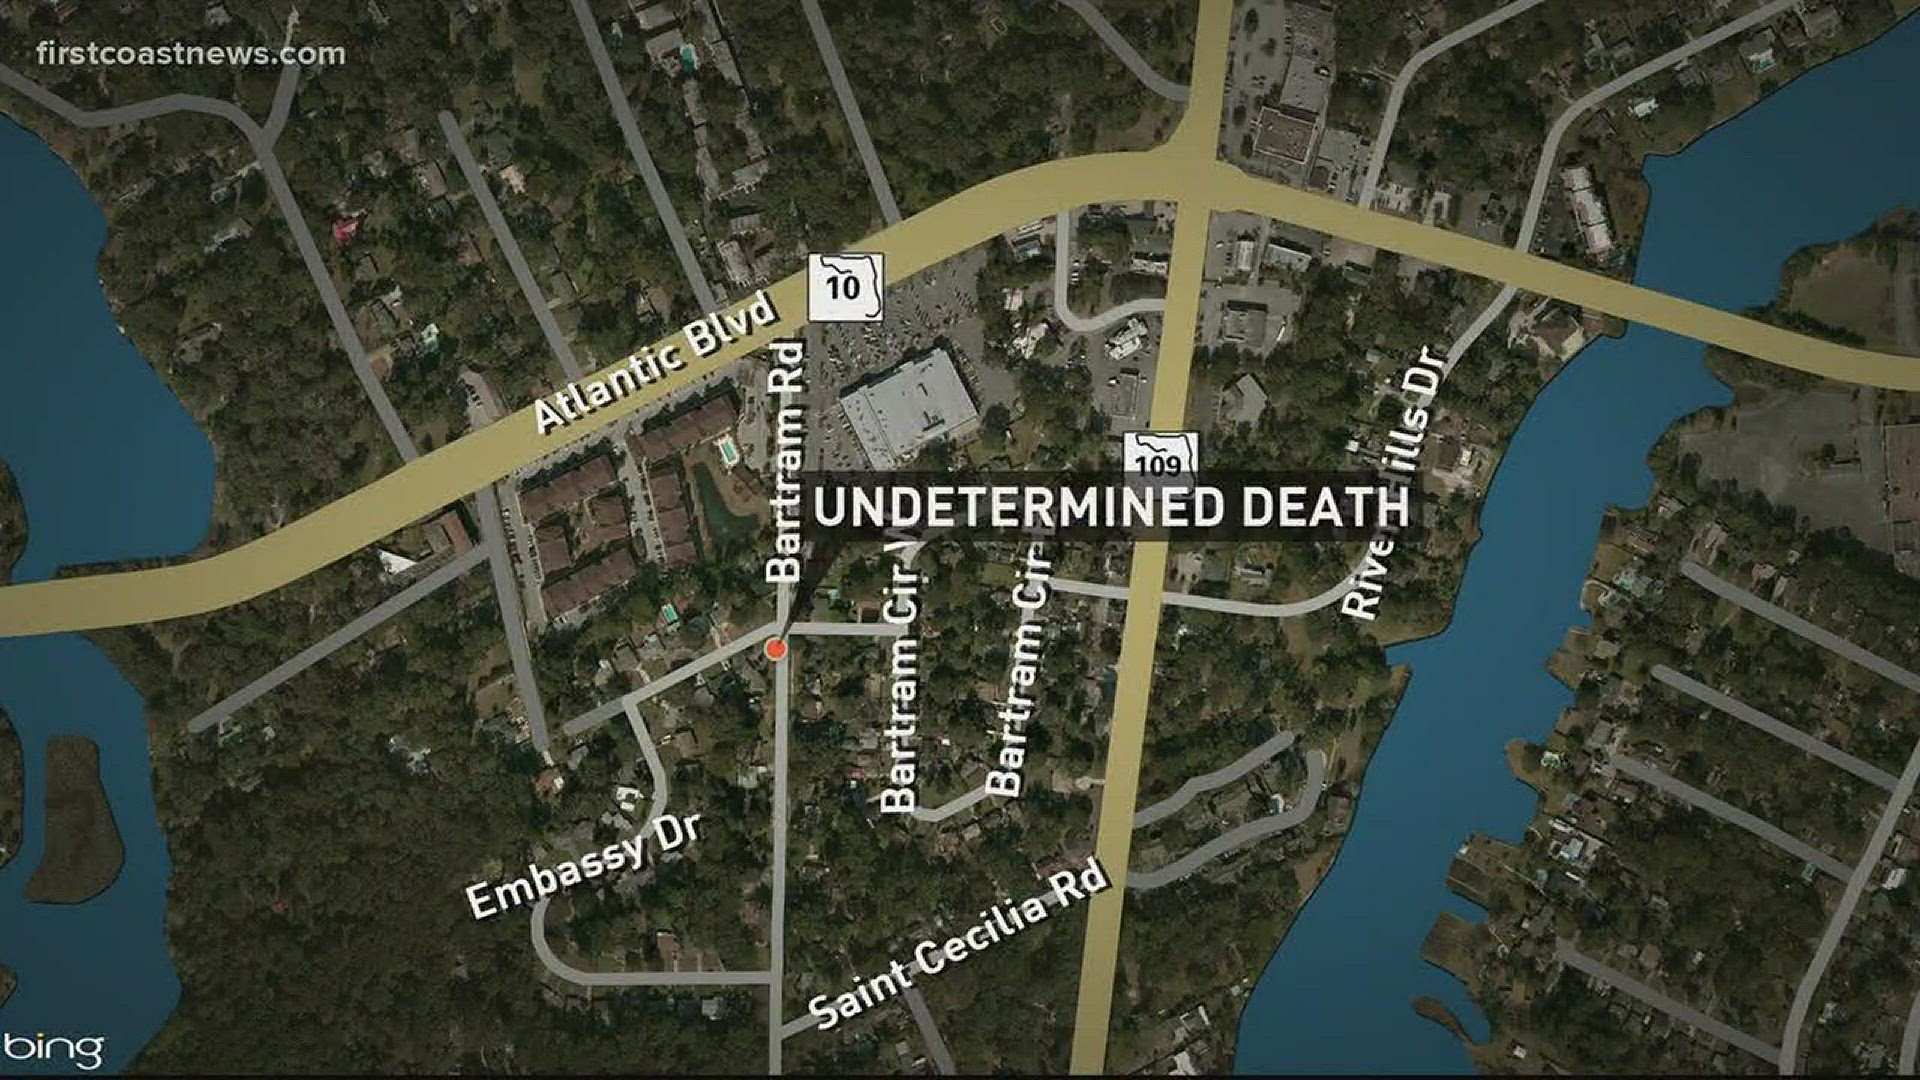 Police are investigating after a woman was found dead in a pool Monday afternoon near Atlantic Blvd and Bartram Road.